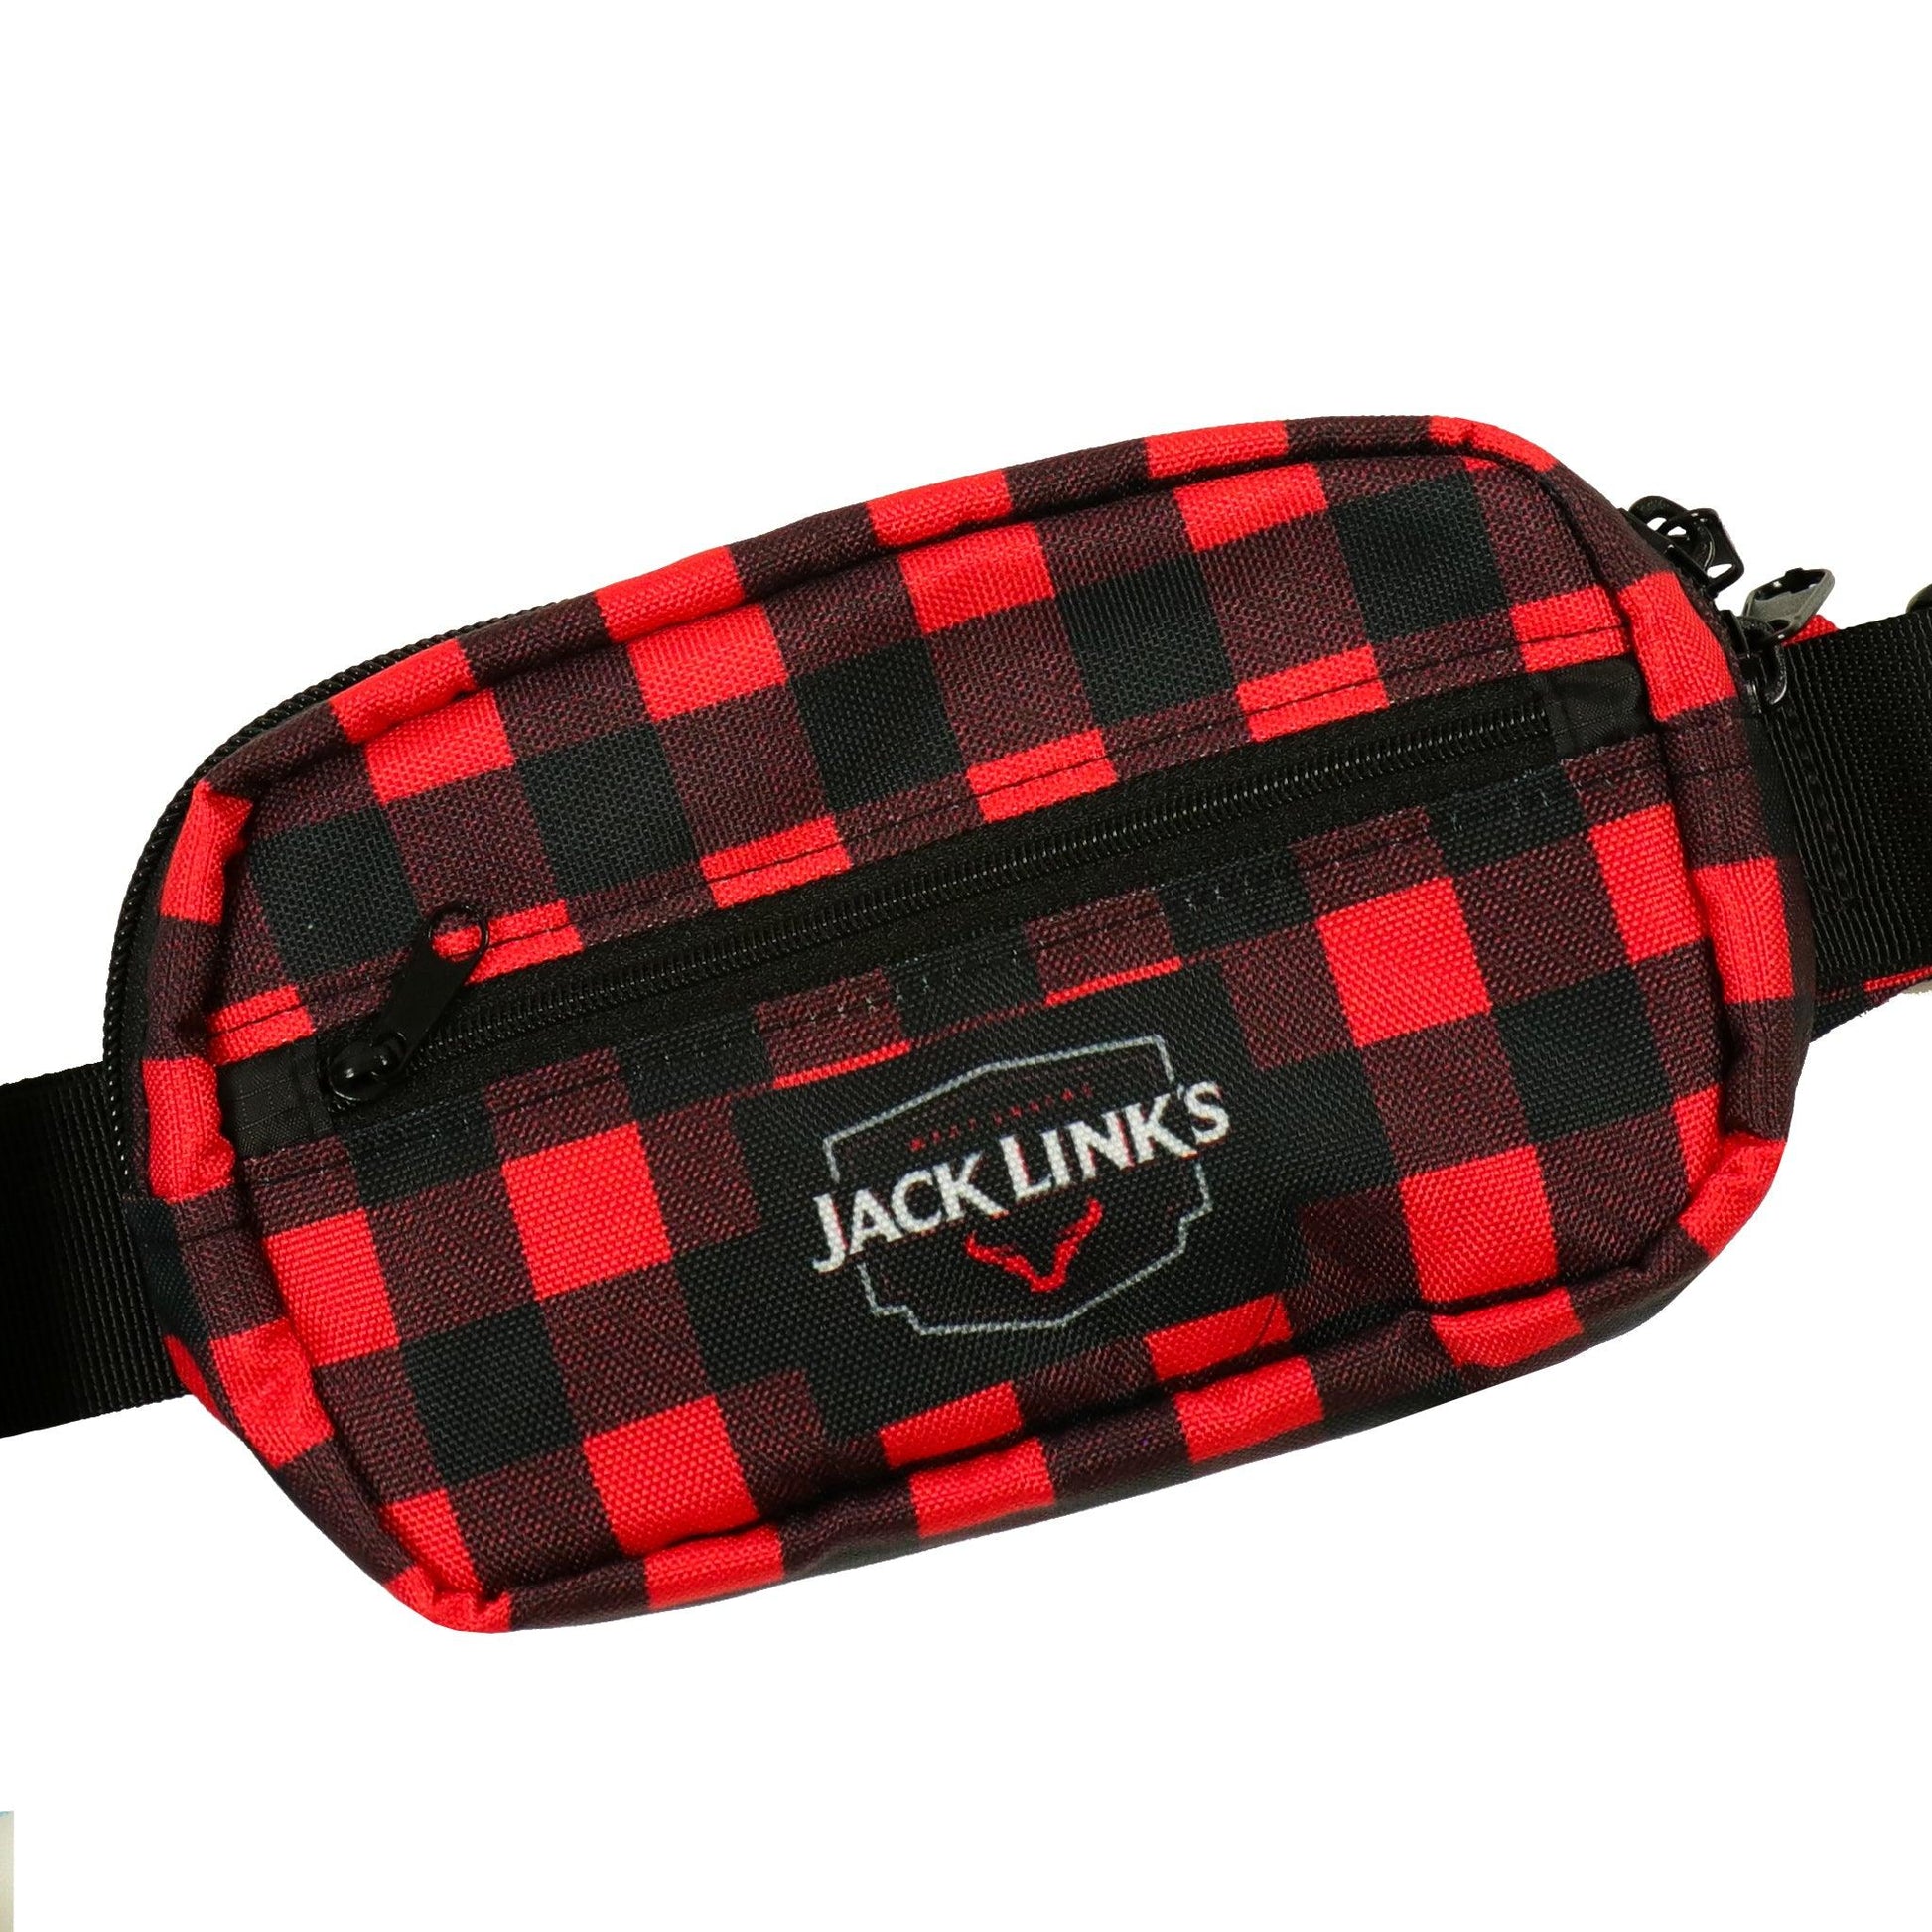 CLOSE UP OF FRONT OF FANNY PACK WITH JACK LINKS LOGO AND FRONT ZIPPER ENCLOSURE